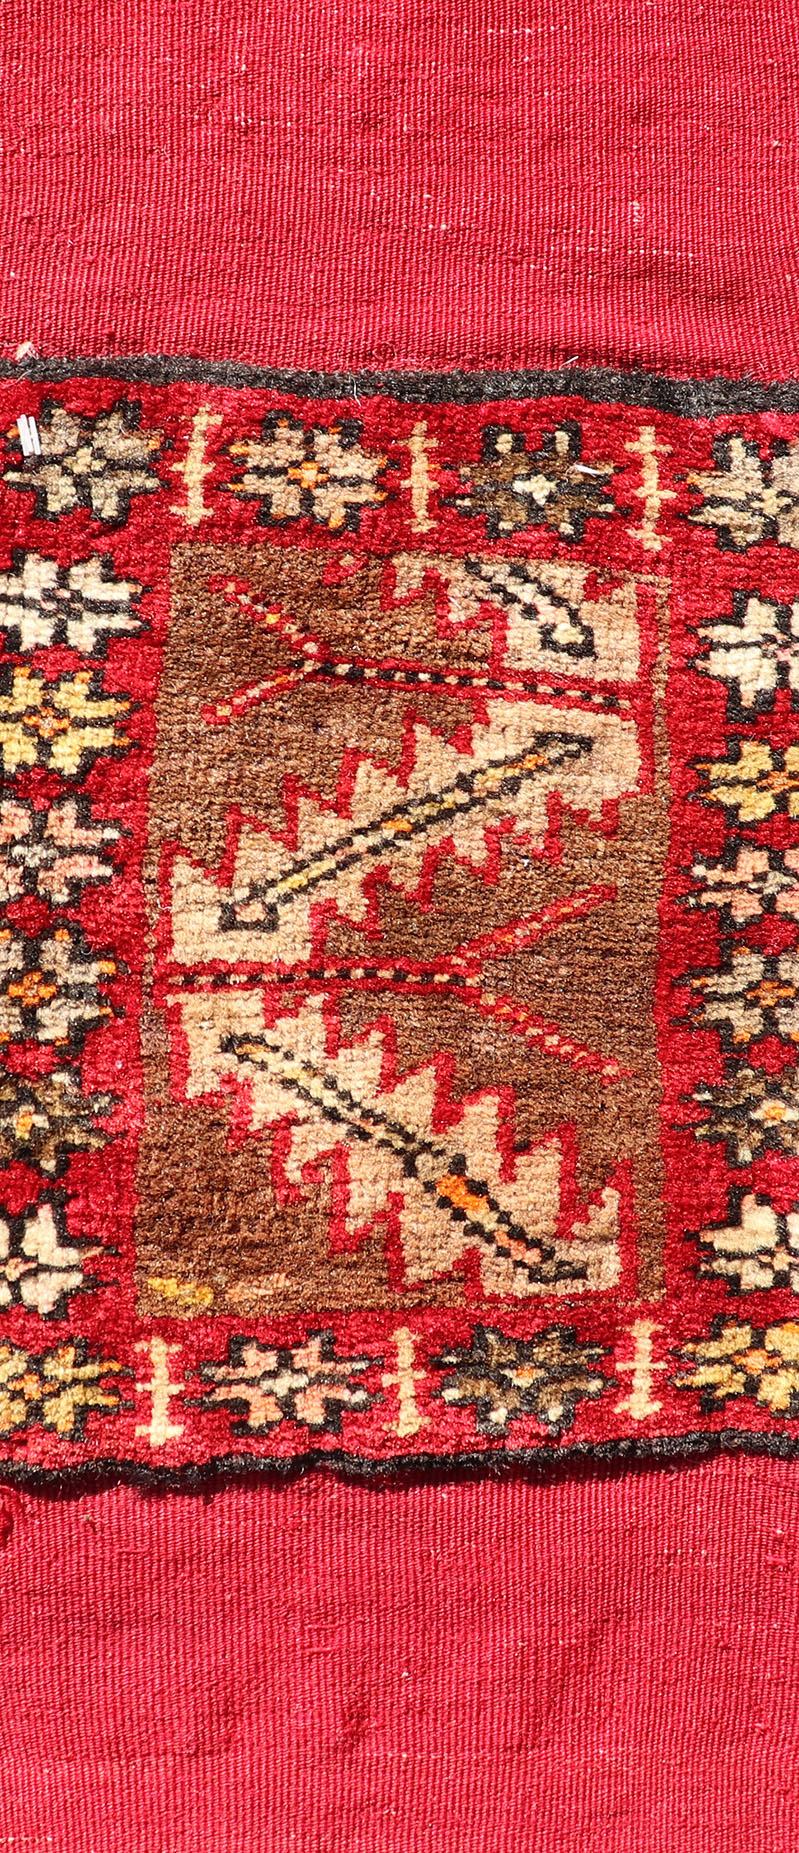 Wool Pair of Antique Turkish Sampler Rugs with Coral, Yellow and Brown Colors For Sale